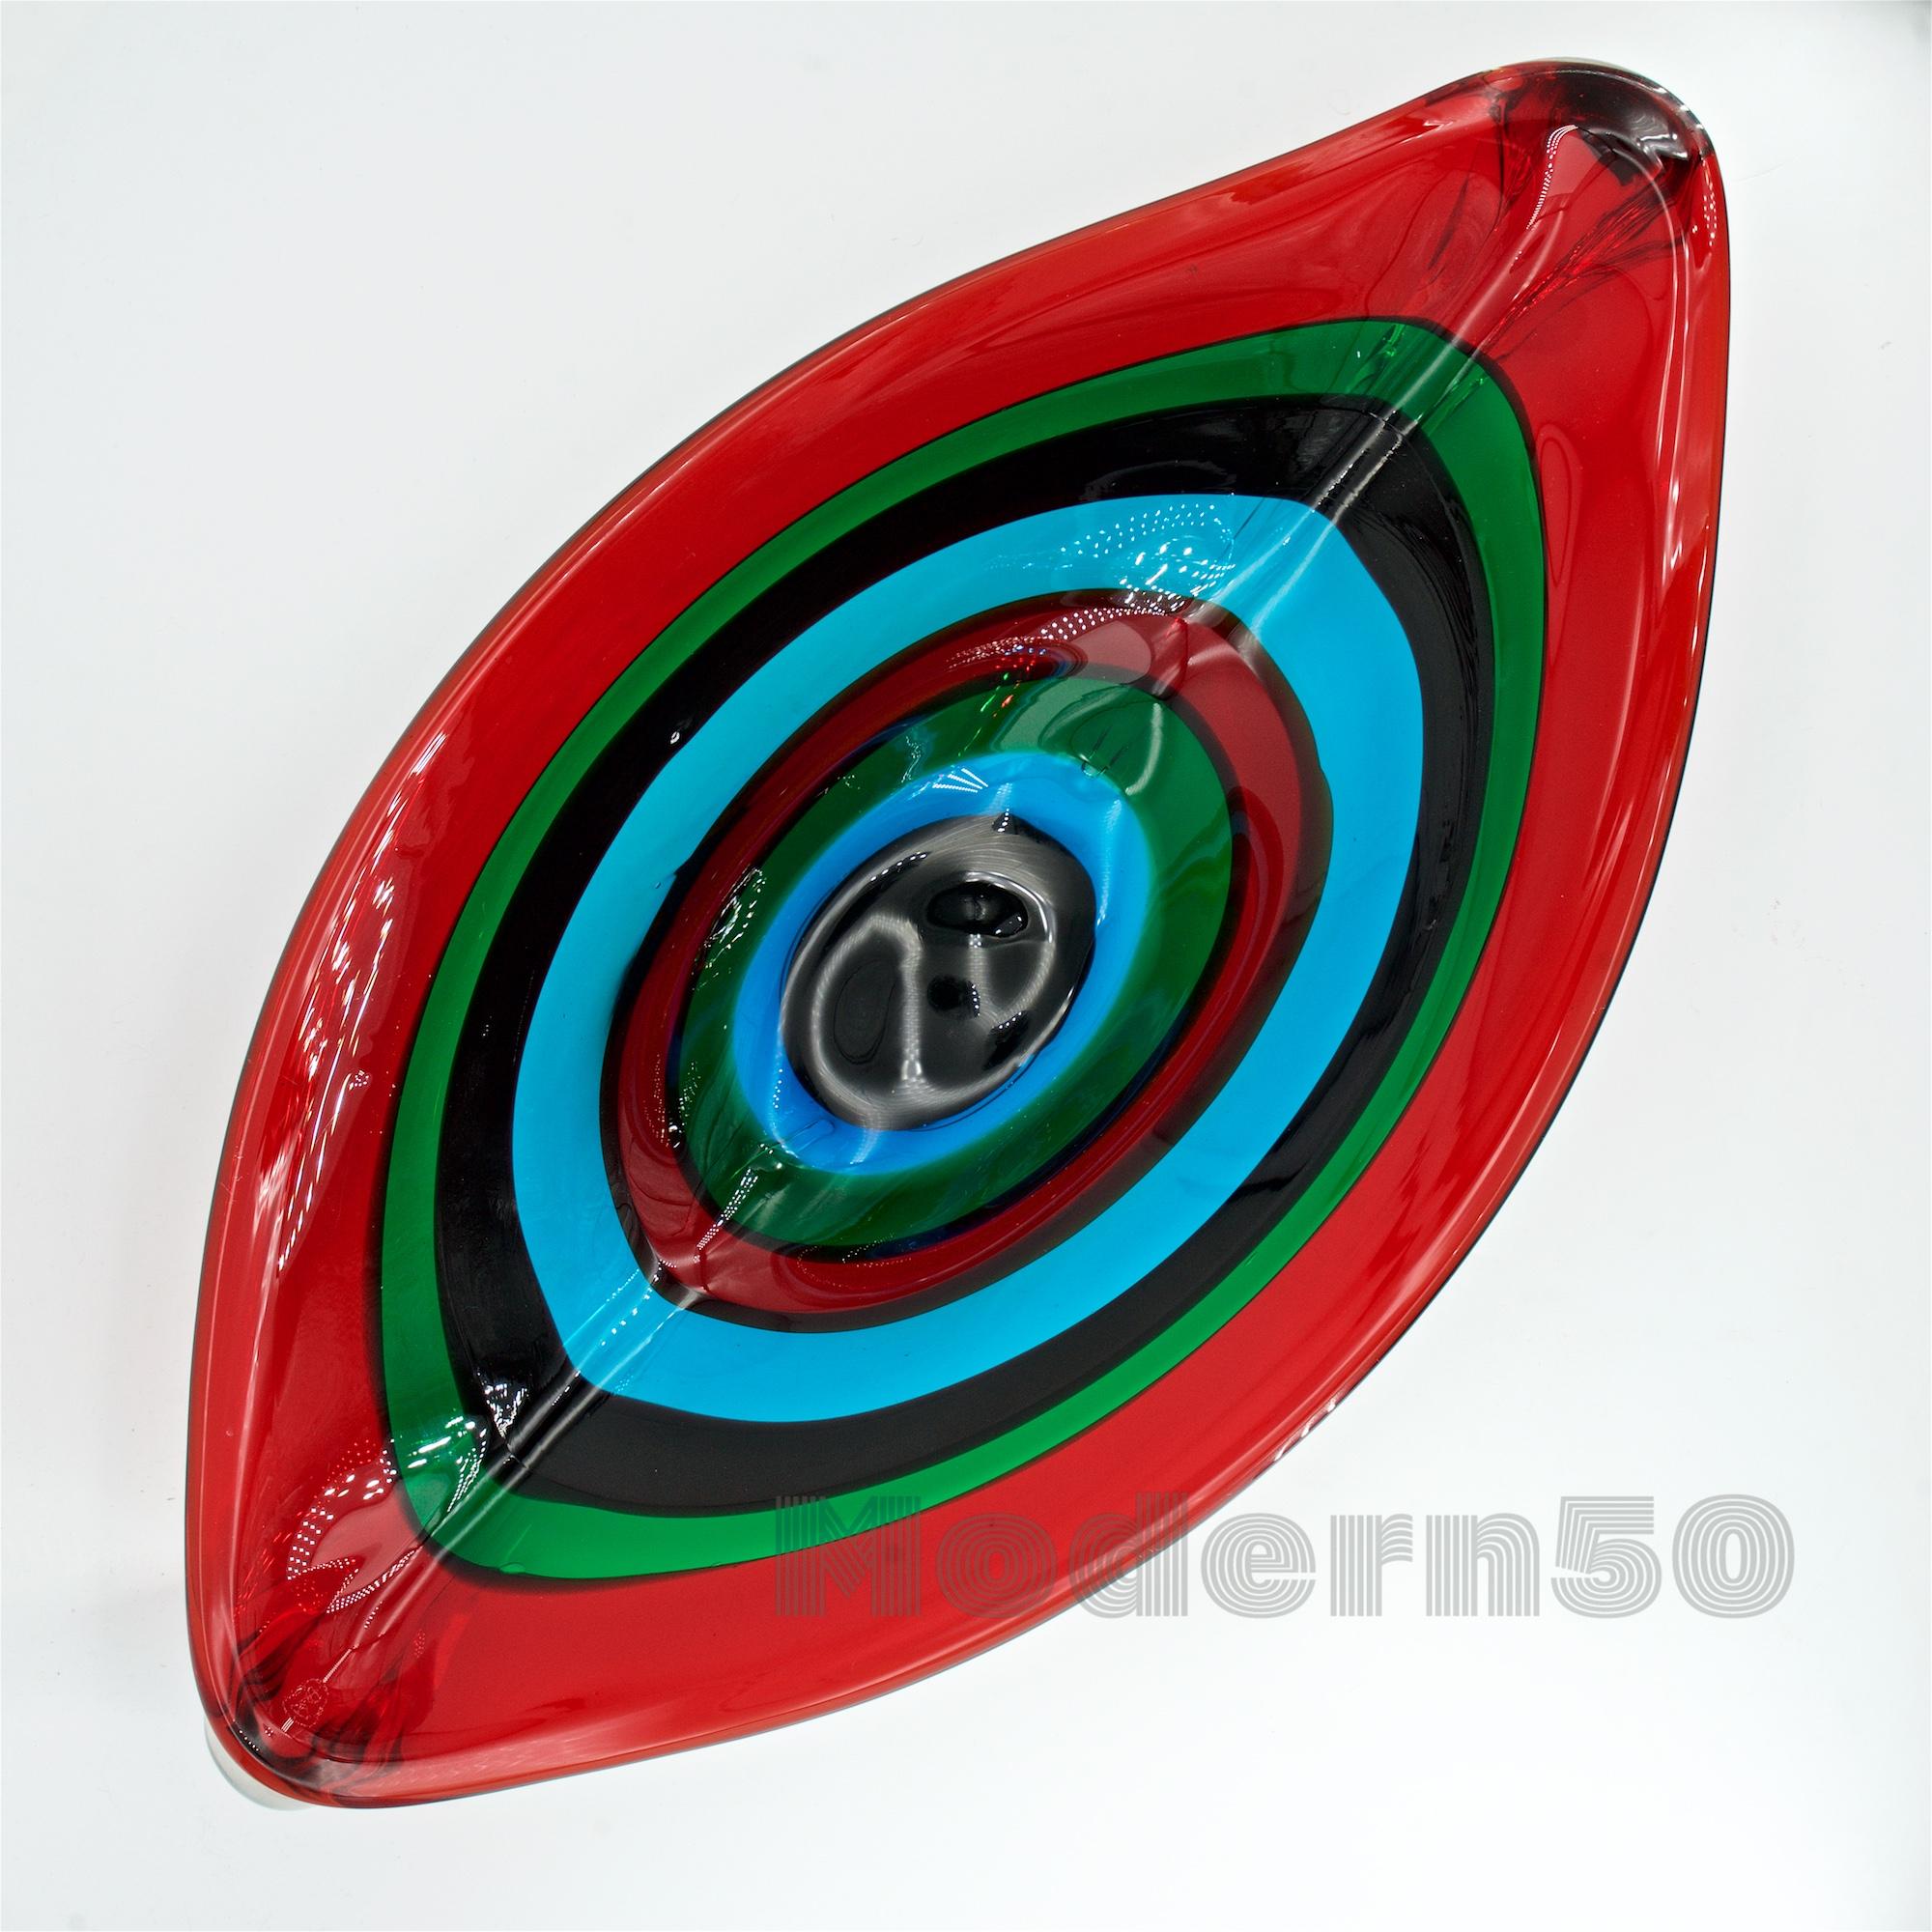 Rare 'A FASCE' centerpiece bowl by Fulvio Bianconi for I.V.R. Mazzega, Murano, Italy, 1959. An eye shaped body, clear glass handles with applied horizontal bands in red, blue, green, purple, turquoise and black. Over 21 inches long, and weighing